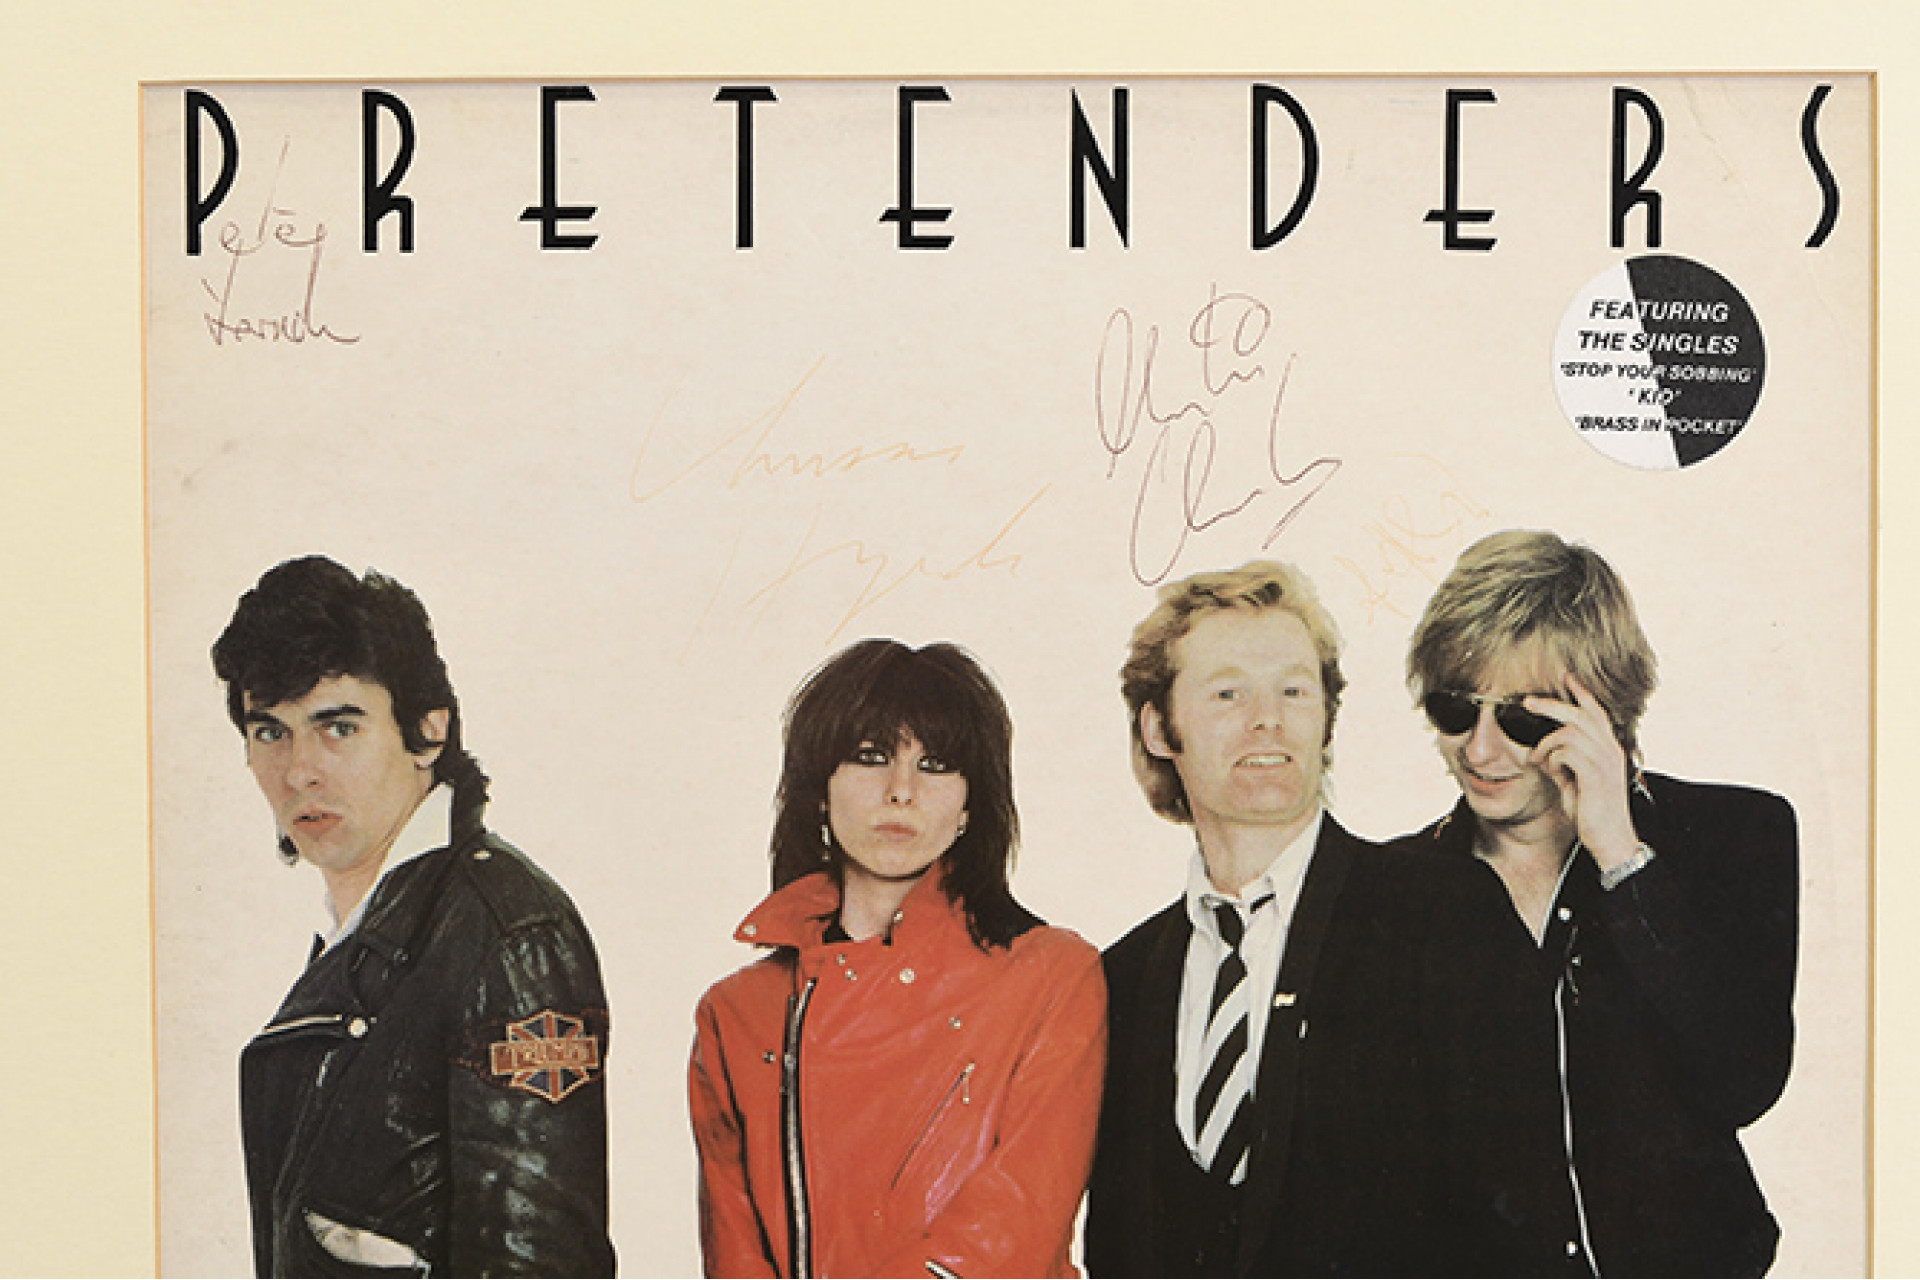 Signed Album by The Pretenders